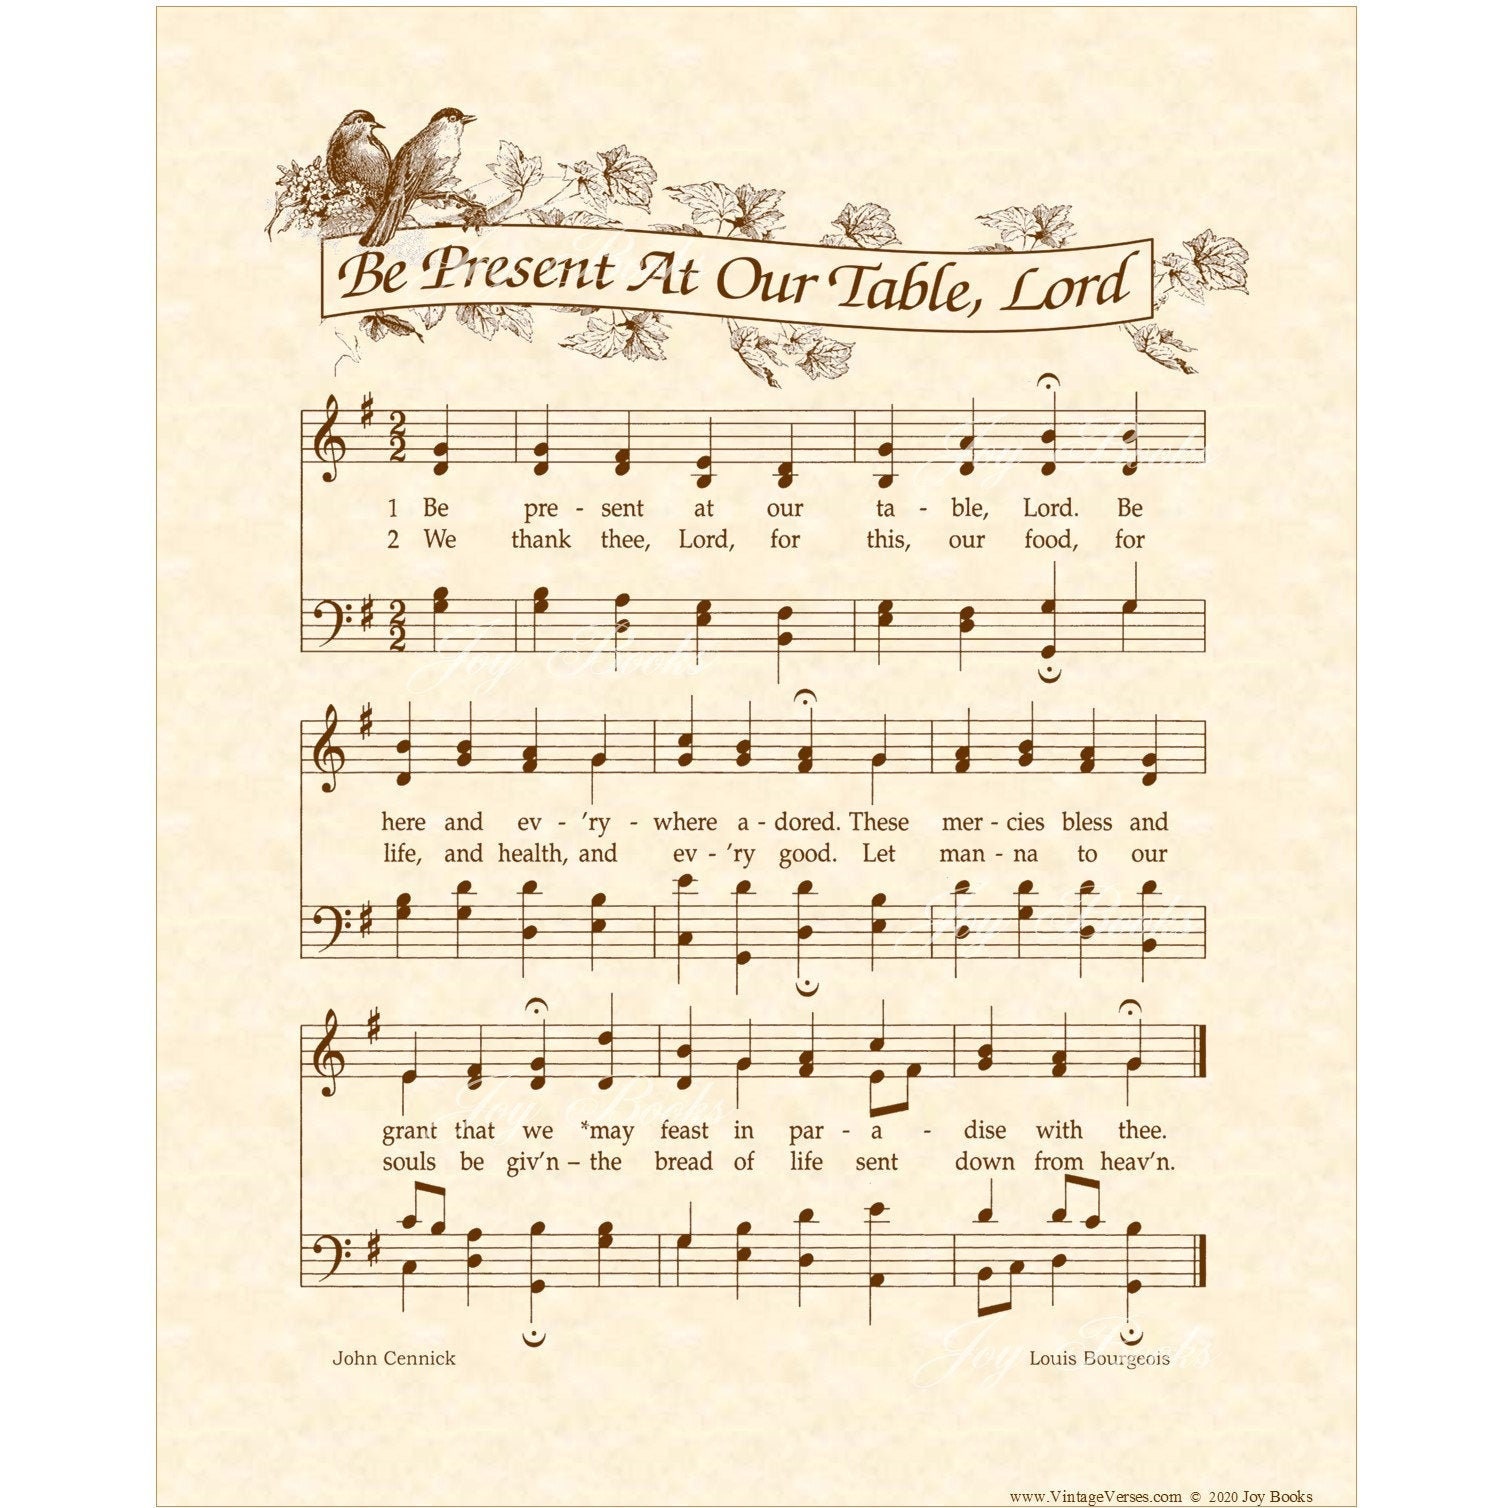 HOW GREAT THOU Art - 11x14 Antique Hymn Art Print on Natural Parchment in  Sepia Brown Ink